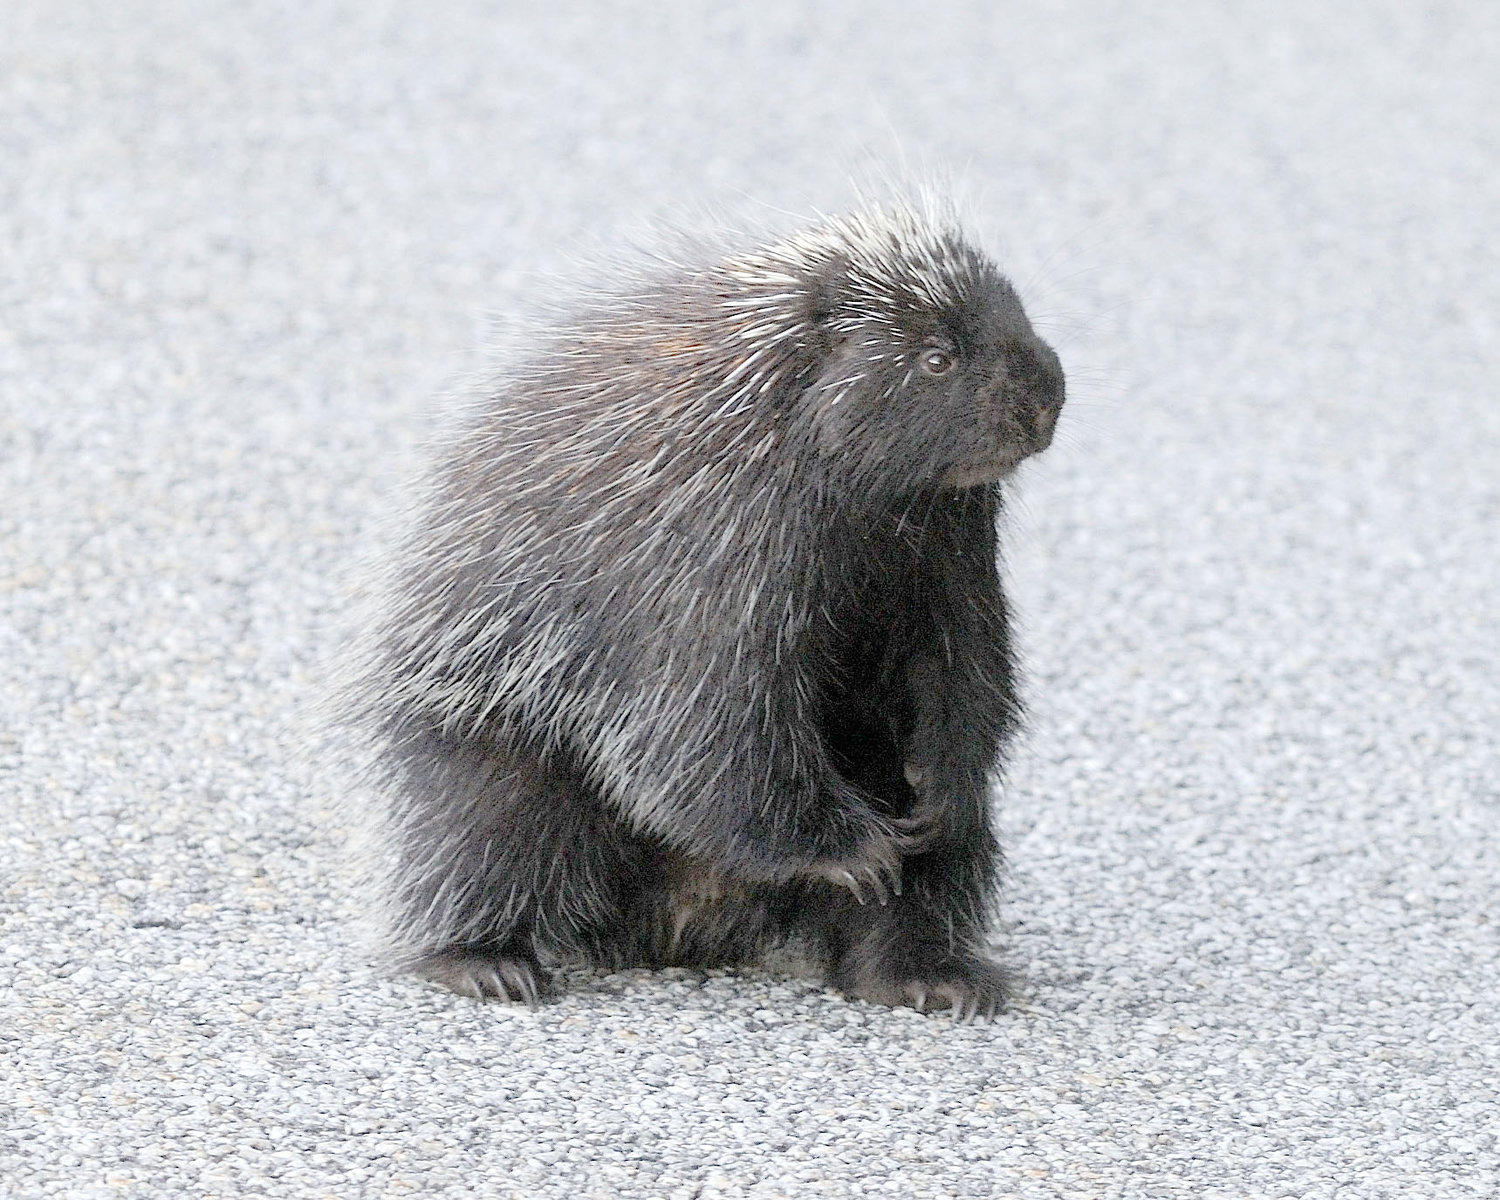 This porcupine wasn’t moving too fast as it crossed the road; I had enough time to stop the car and get out to take a couple of photos. You can see the long claws that enable porcupines to climb trees. A porcupine’s quills cover its back and tail, while its face and underside just have fur.